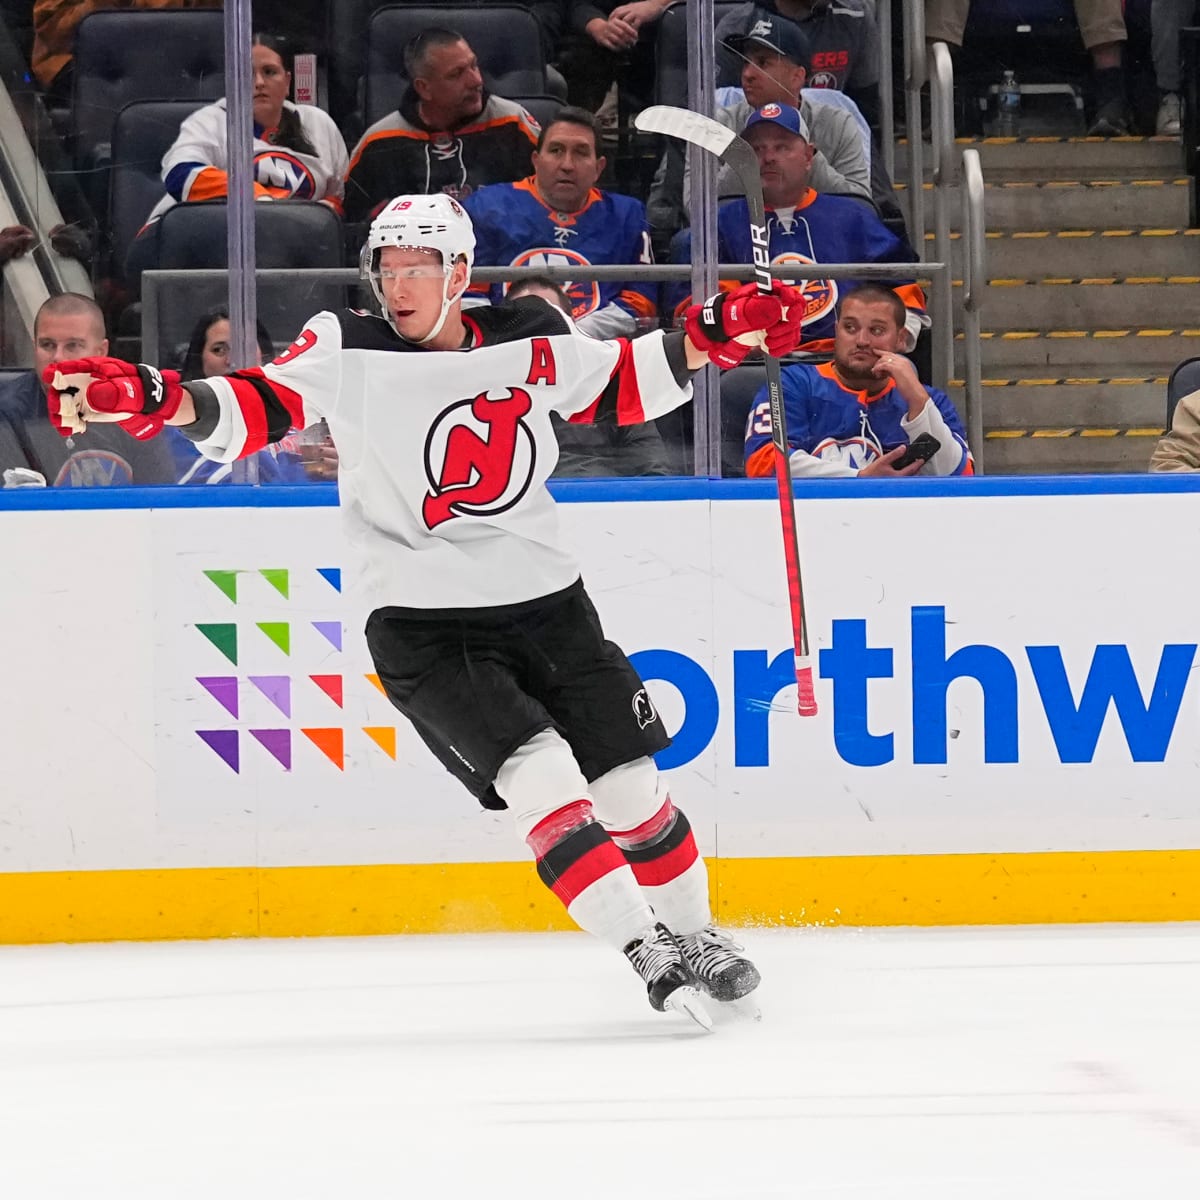 N.J. Devils heading into 2023-24 season with Stanley Cup aspirations